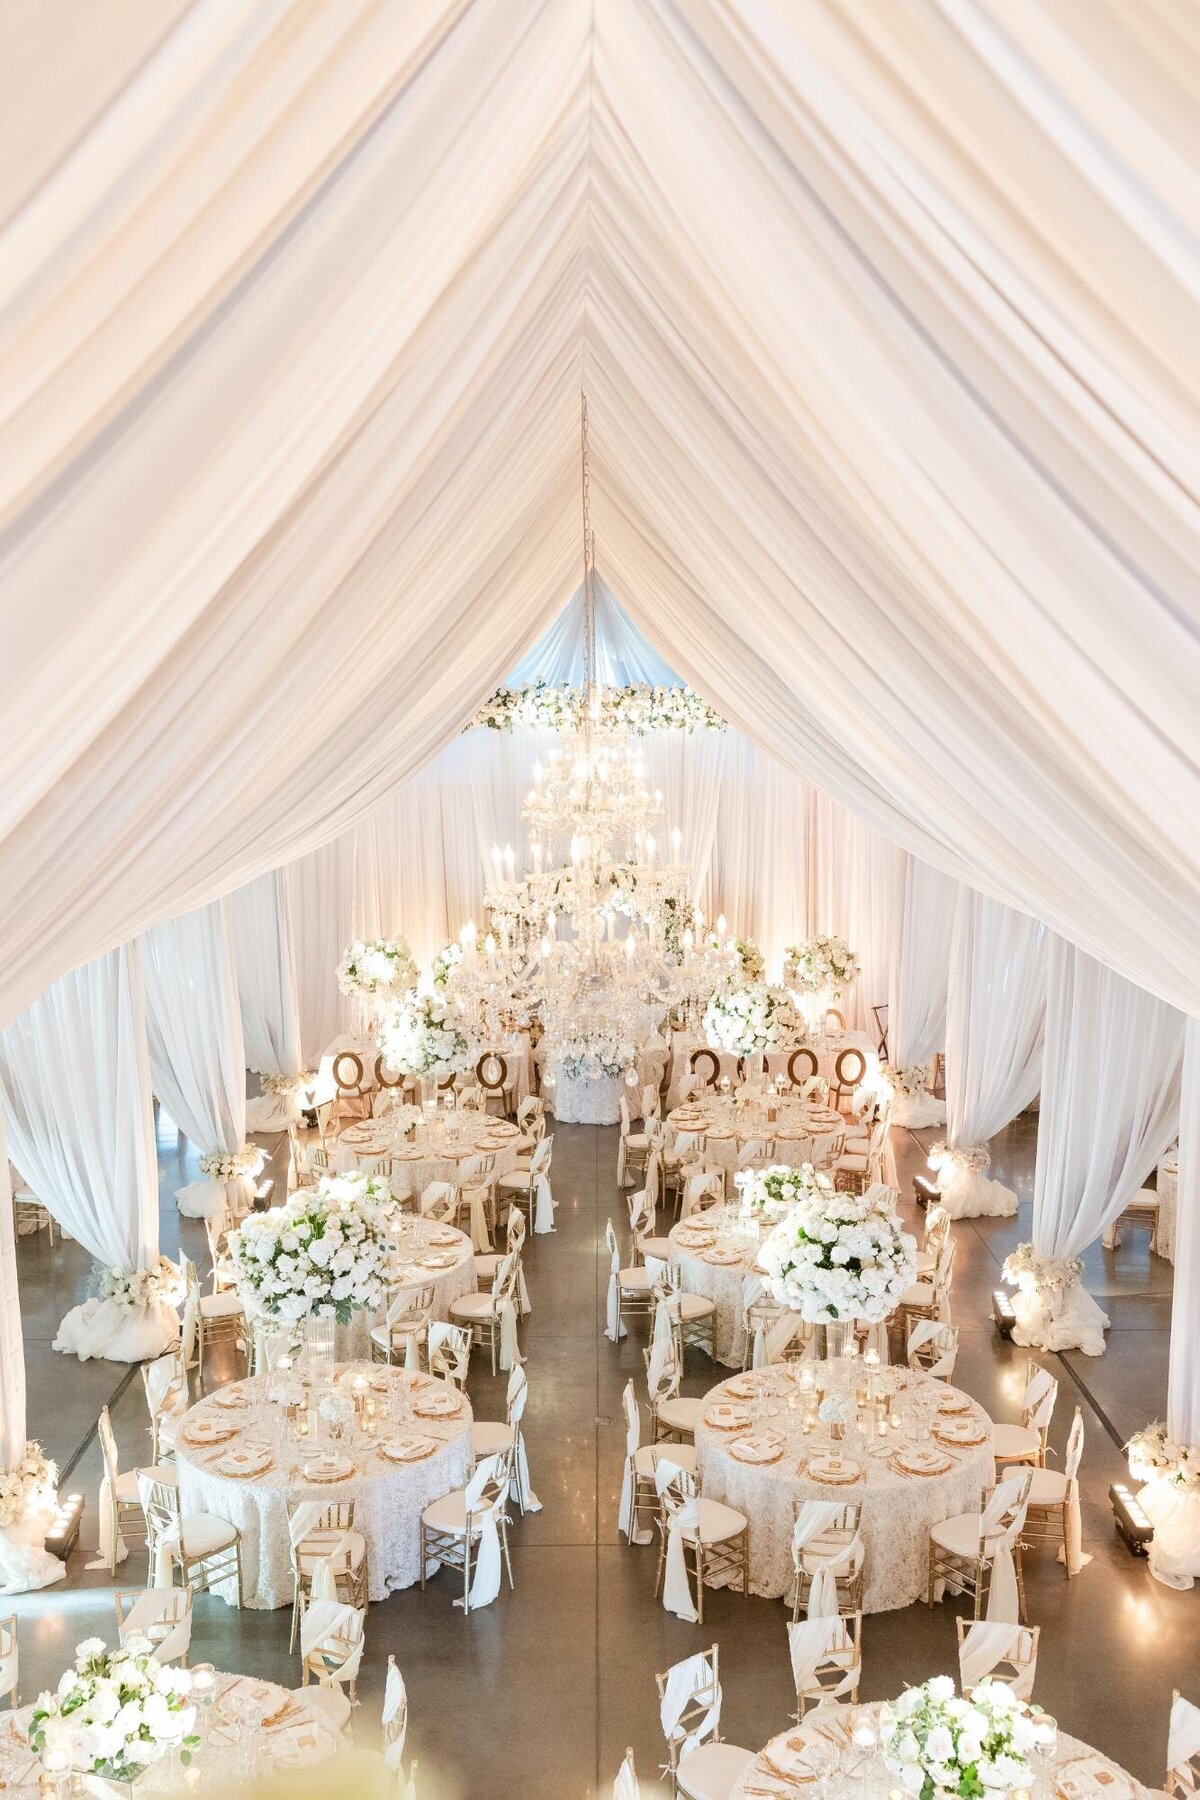 Elegant wedding reception hall with white drapery and floral centerpieces.